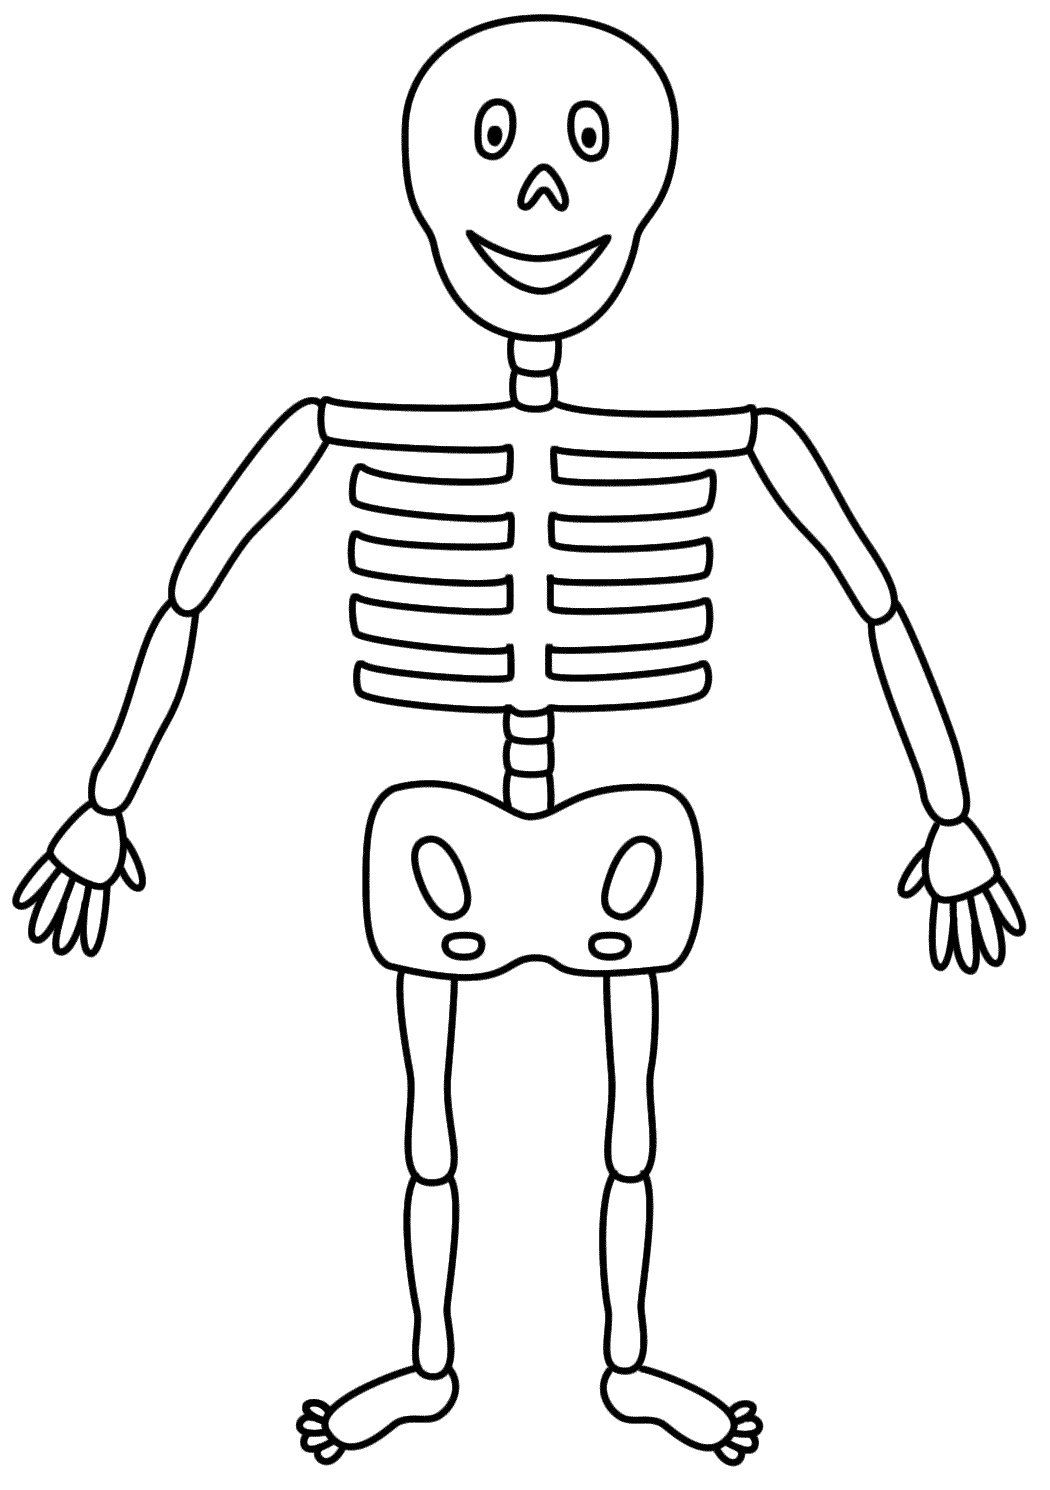 Kids Skeleton Drawing - Cliparts.co